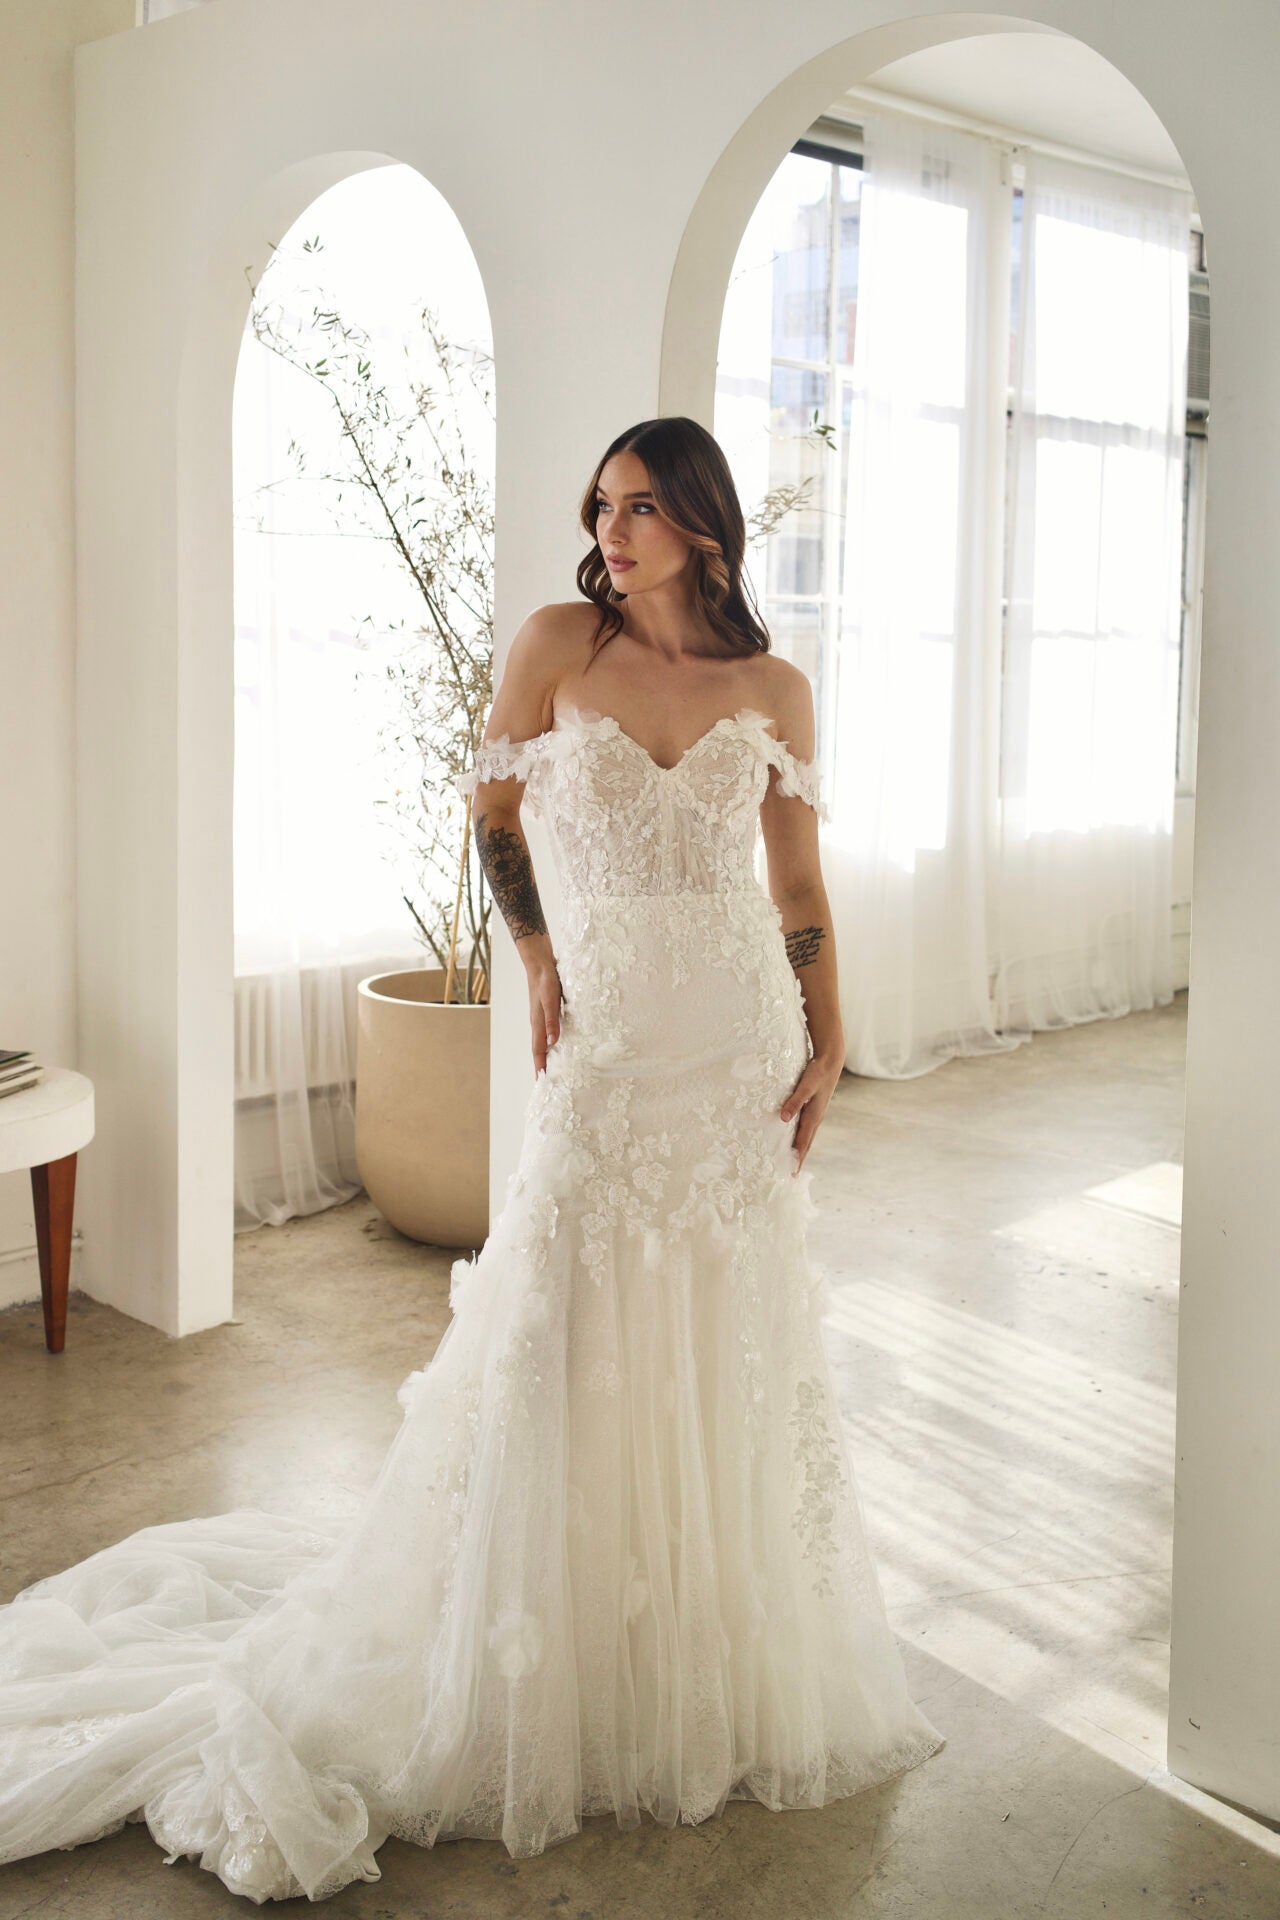 Lace Off The Shoulder Fit And Flare Wedding Dress by Martina Liana - Image 1